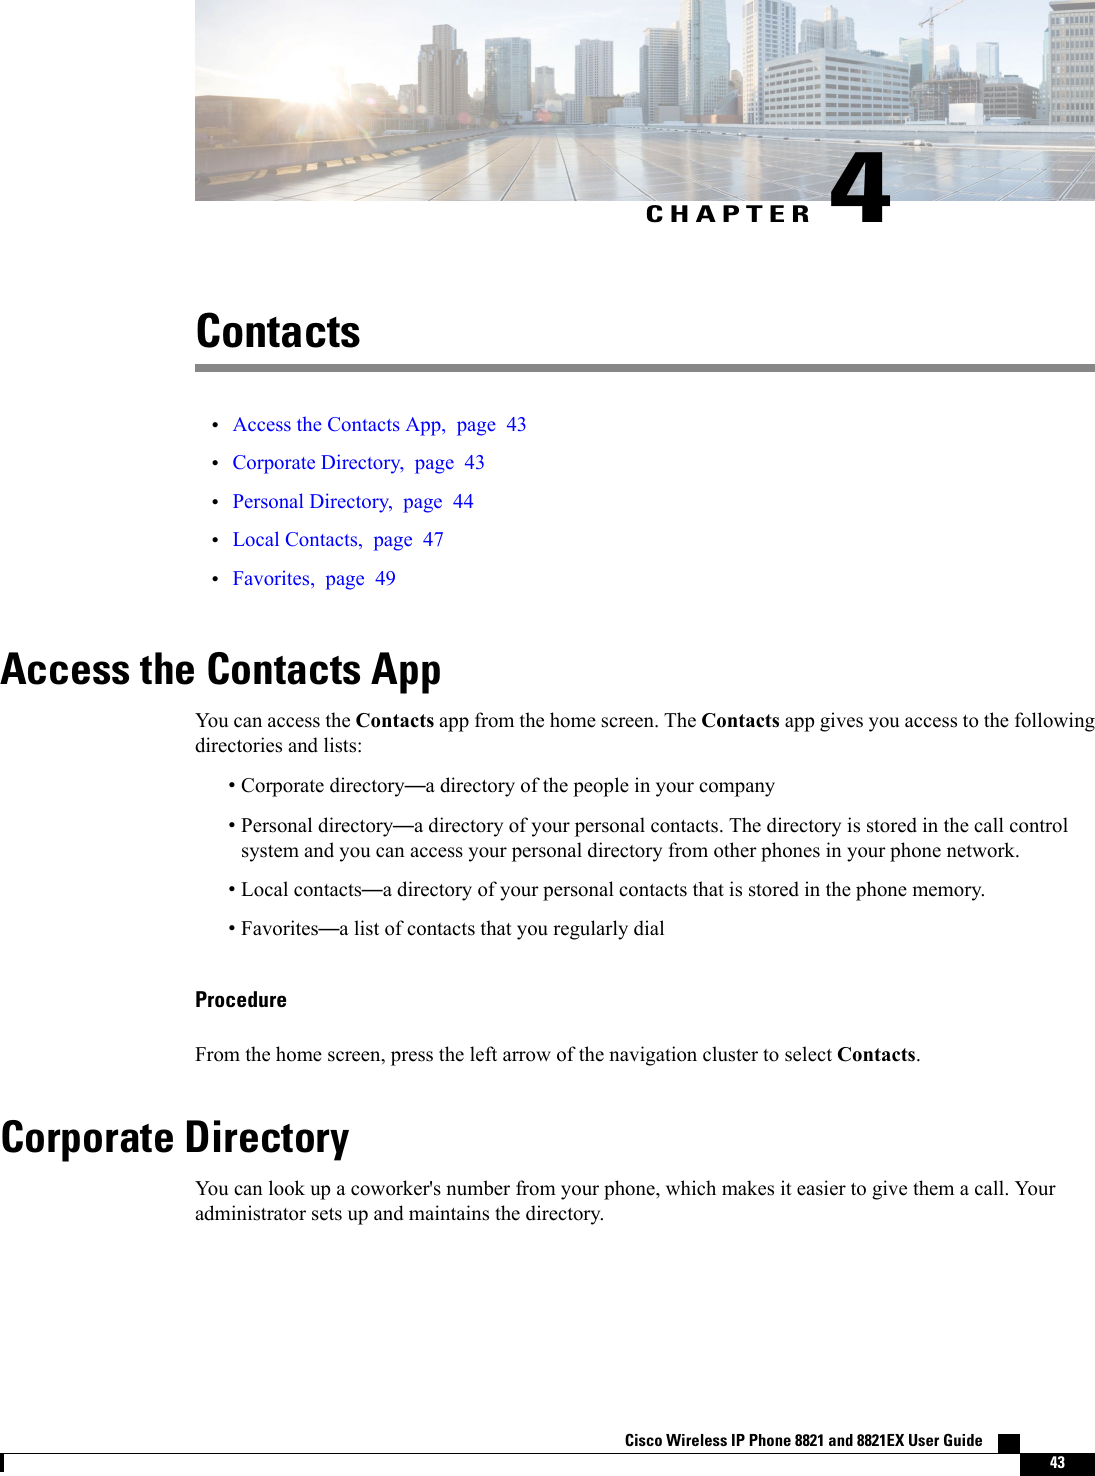 CHAPTER 4Contacts•Access the Contacts App, page 43•Corporate Directory, page 43•Personal Directory, page 44•Local Contacts, page 47•Favorites, page 49Access the Contacts AppYou can access the Contacts app from the home screen. The Contacts app gives you access to the followingdirectories and lists:•Corporate directory—a directory of the people in your company•Personal directory—a directory of your personal contacts. The directory is stored in the call controlsystem and you can access your personal directory from other phones in your phone network.•Local contacts—a directory of your personal contacts that is stored in the phone memory.•Favorites—alist of contacts that you regularly dialProcedureFrom the home screen, press the left arrow of the navigation cluster to select Contacts.Corporate DirectoryYou can look up a coworker&apos;s number from your phone, which makes it easier to give them a call. Youradministrator sets up and maintains the directory.Cisco Wireless IP Phone 8821 and 8821EX User Guide    43